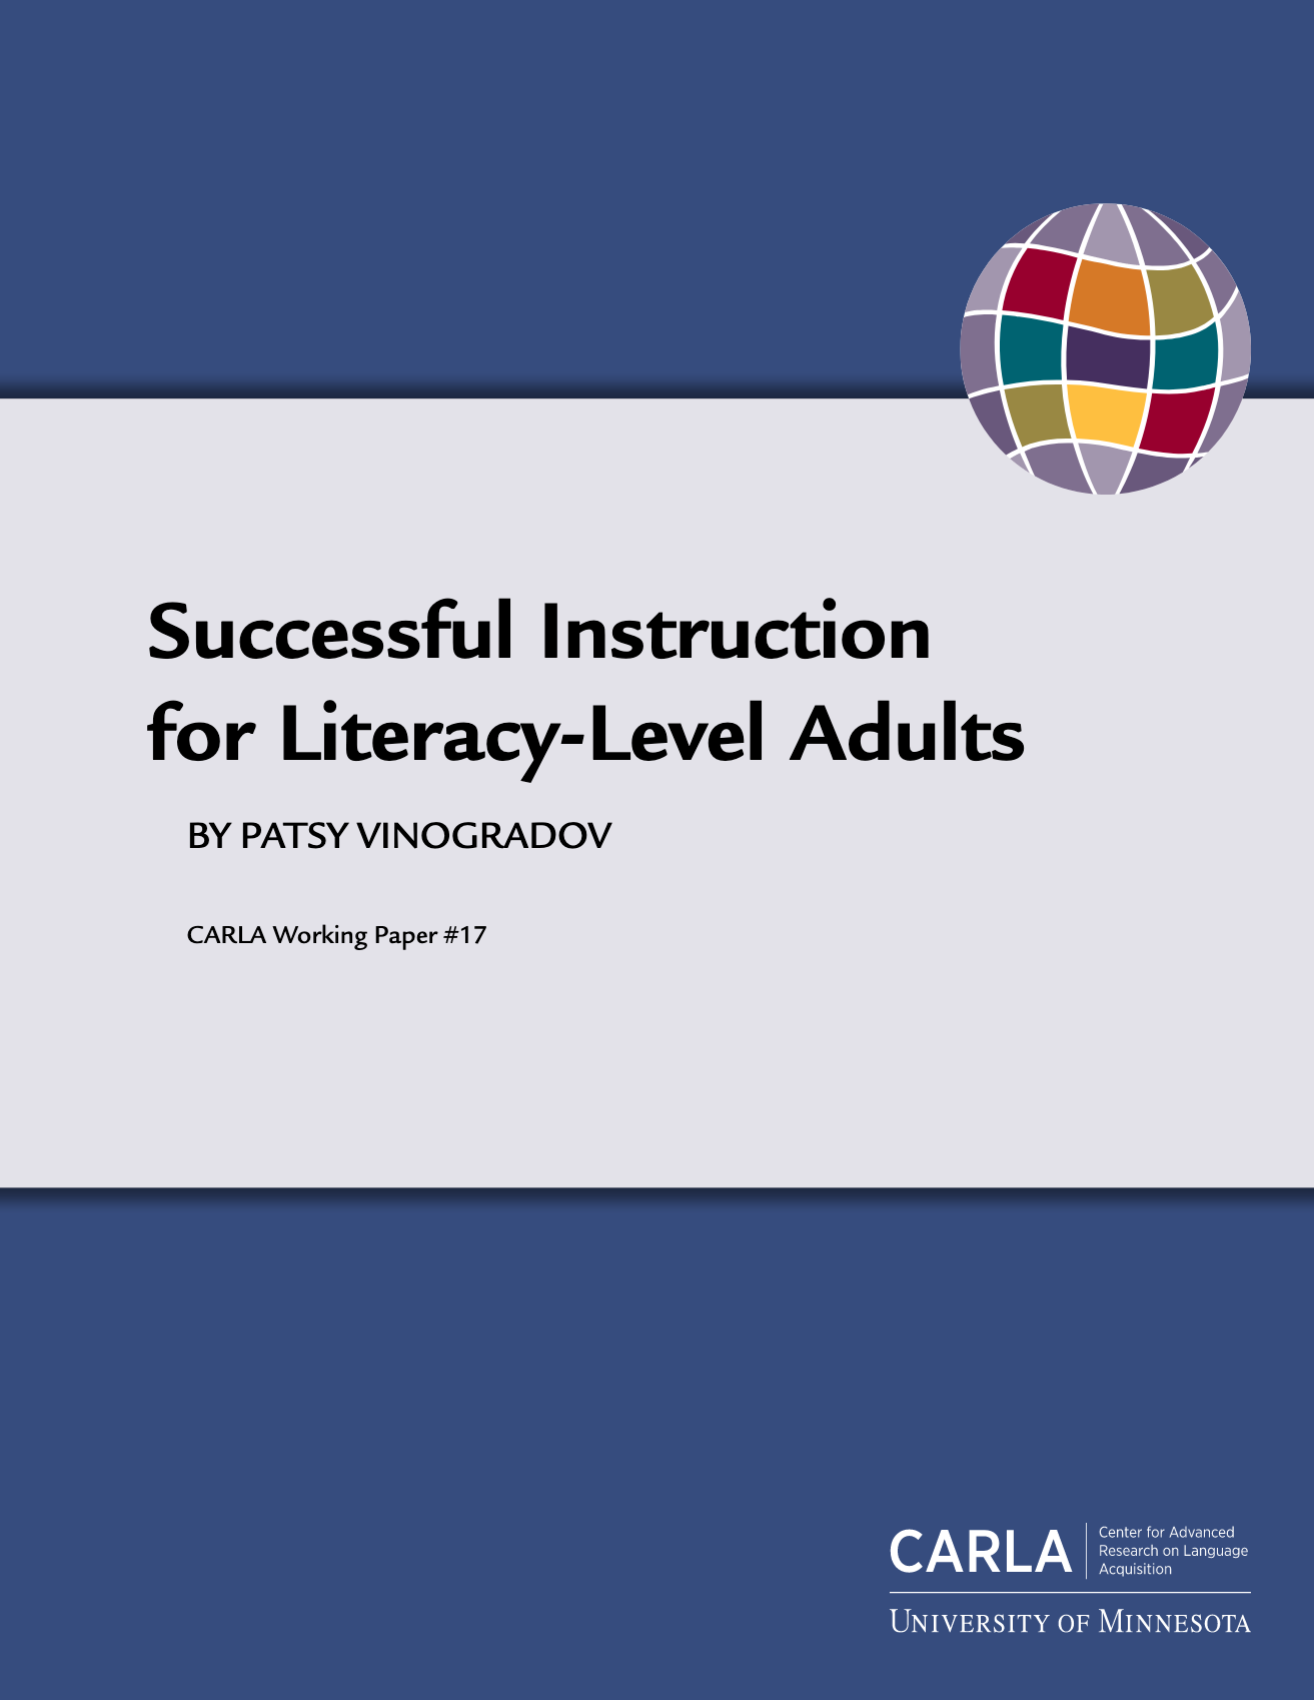 Successful Instruction for Literacy-Level Adults